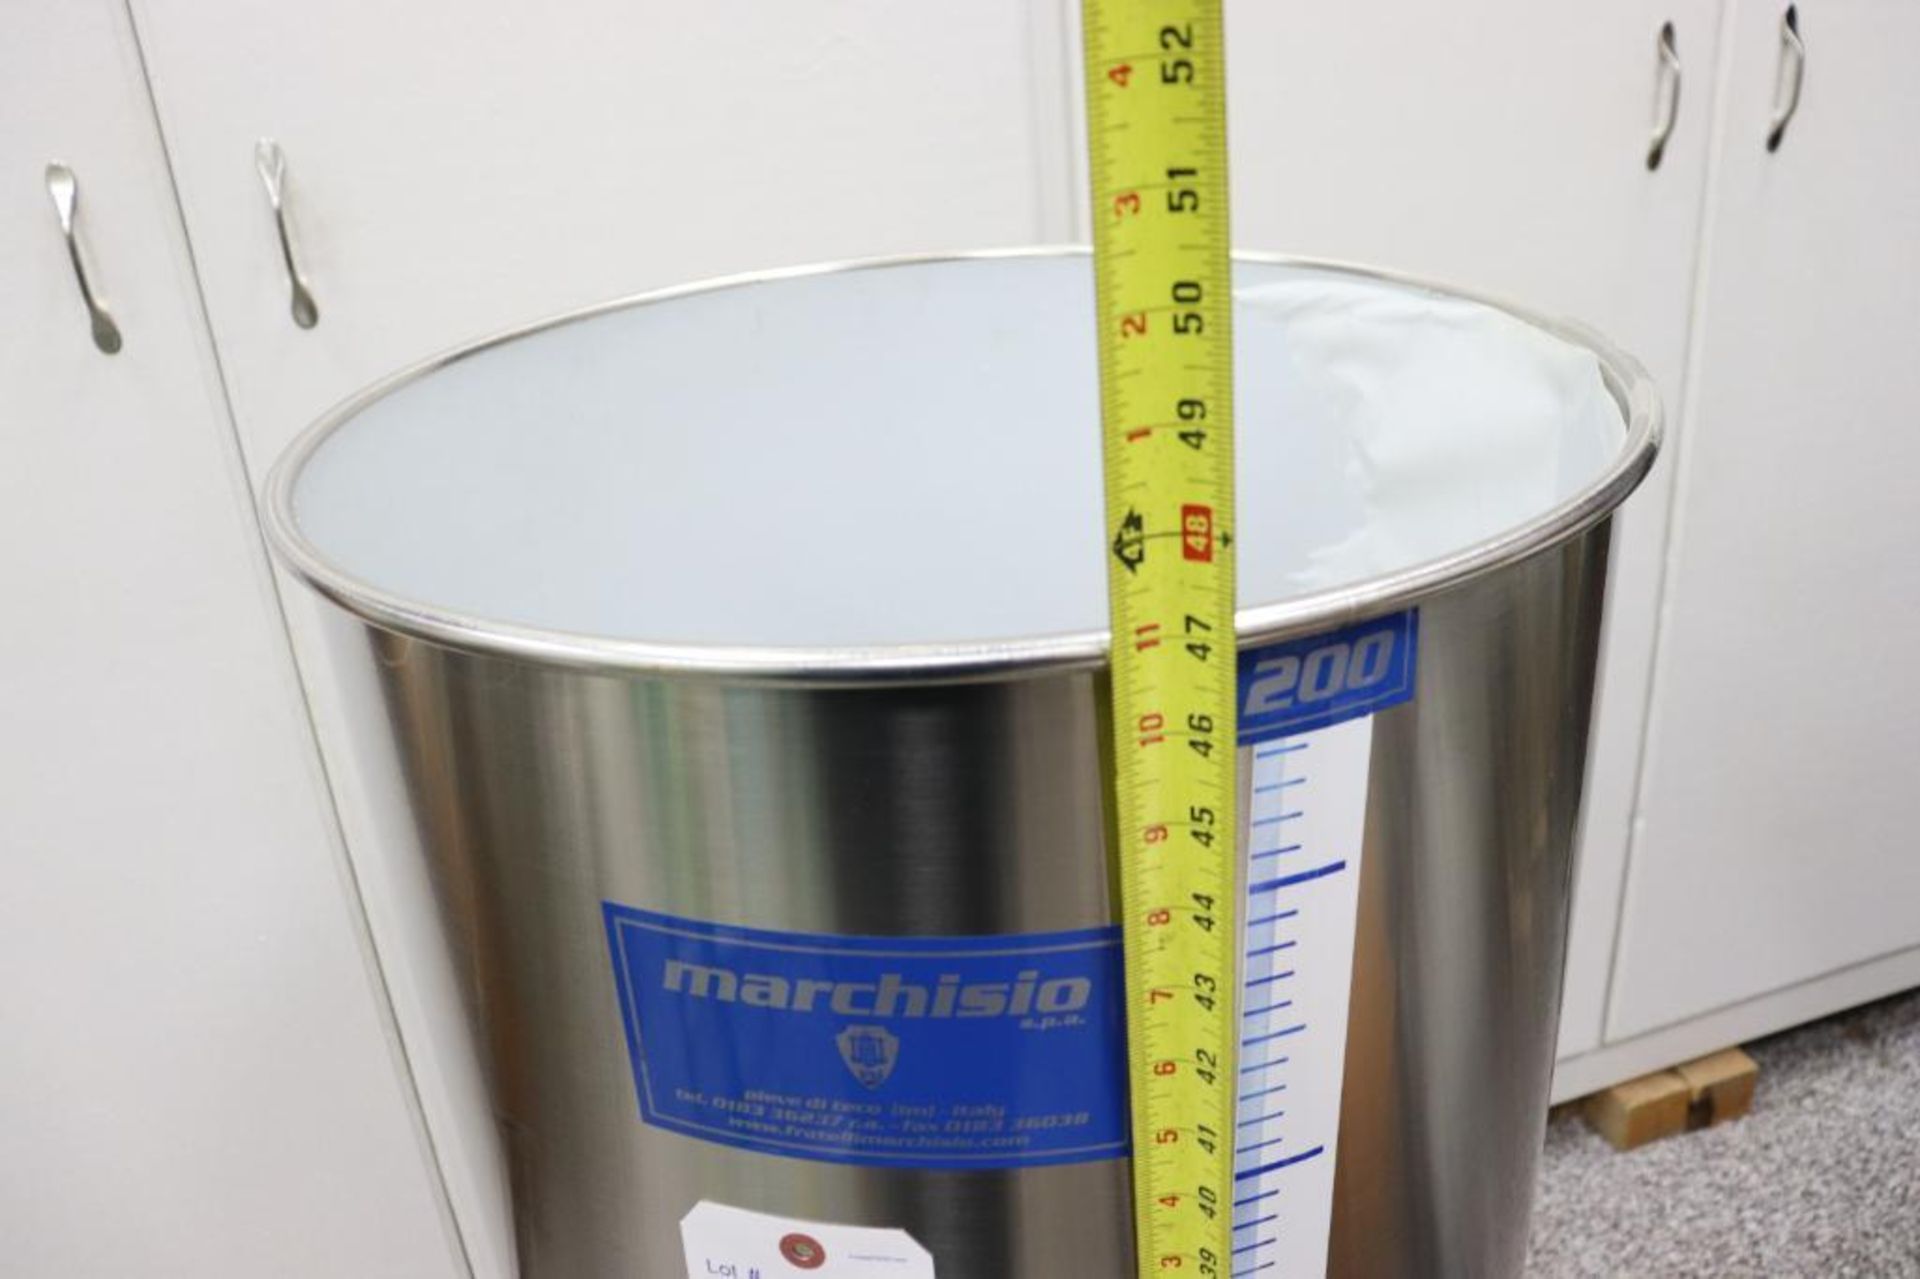 Marchisio 200 L variable capacity fermenting tank - Image 7 of 7